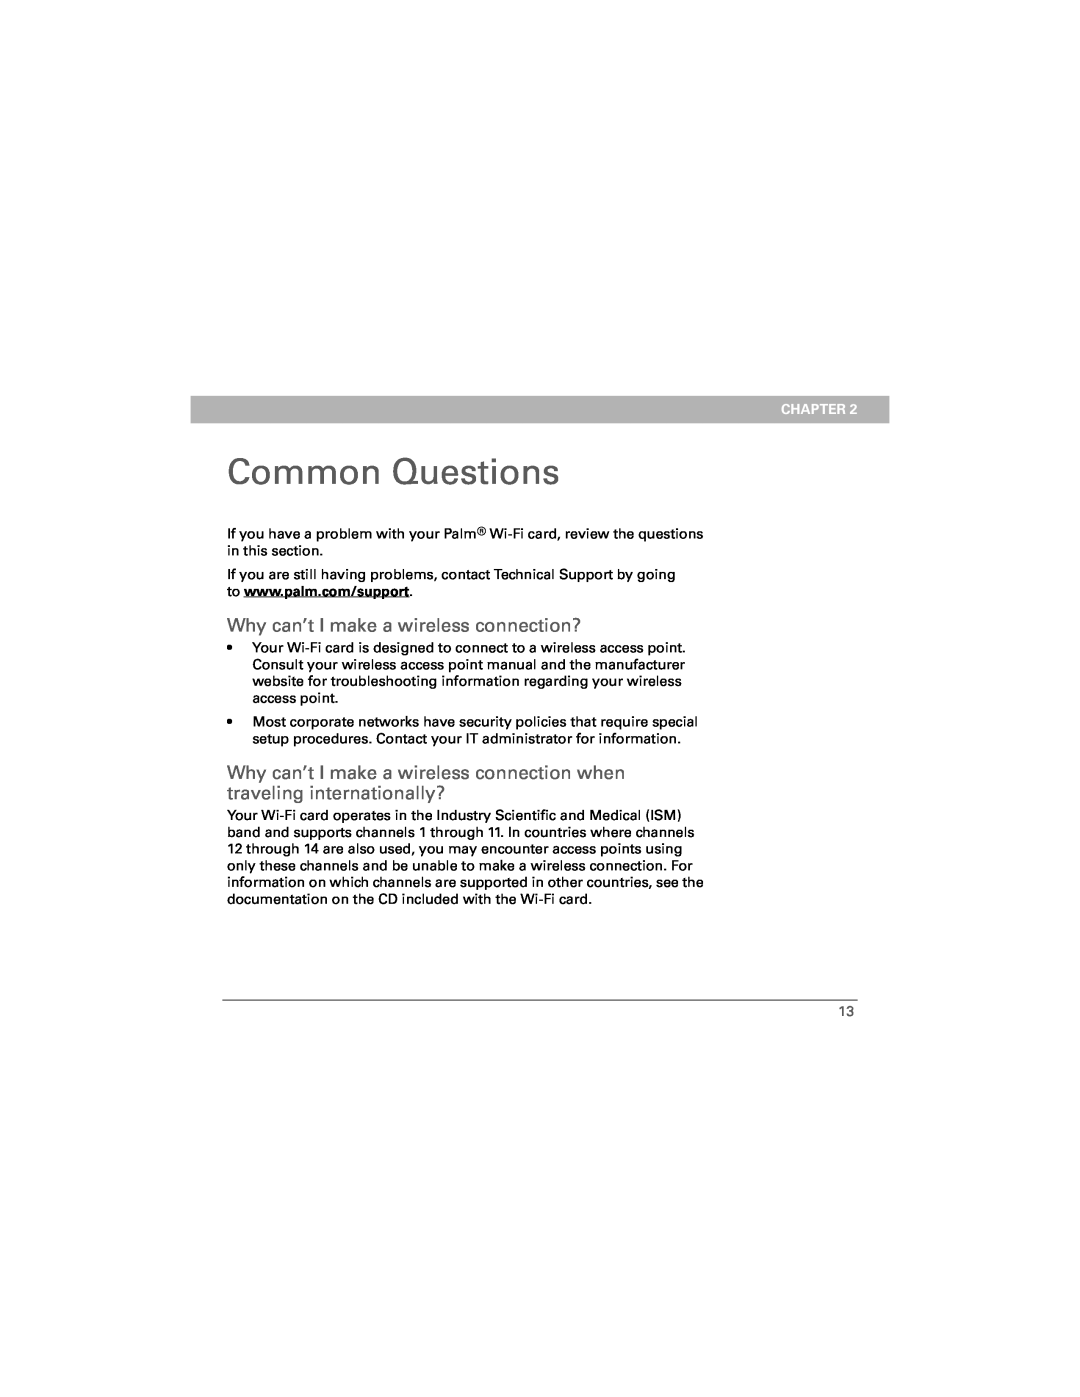 Palm Wi-Fi Card manual Common Questions, Why can’t I make a wireless connection?, Chapter 